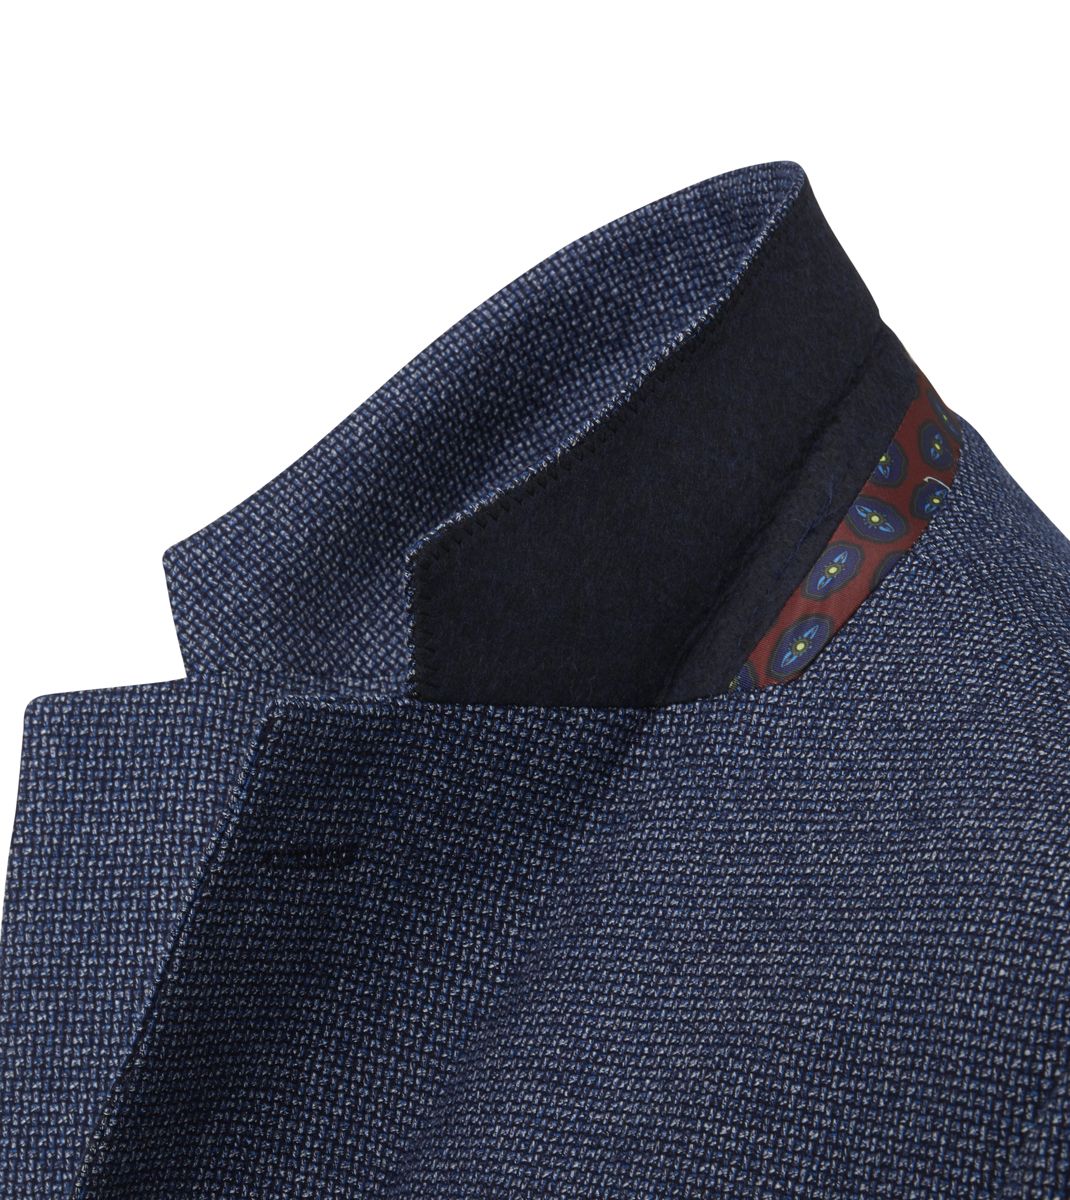 Cole Navy Tapered Fit Blazer-Collar detail view